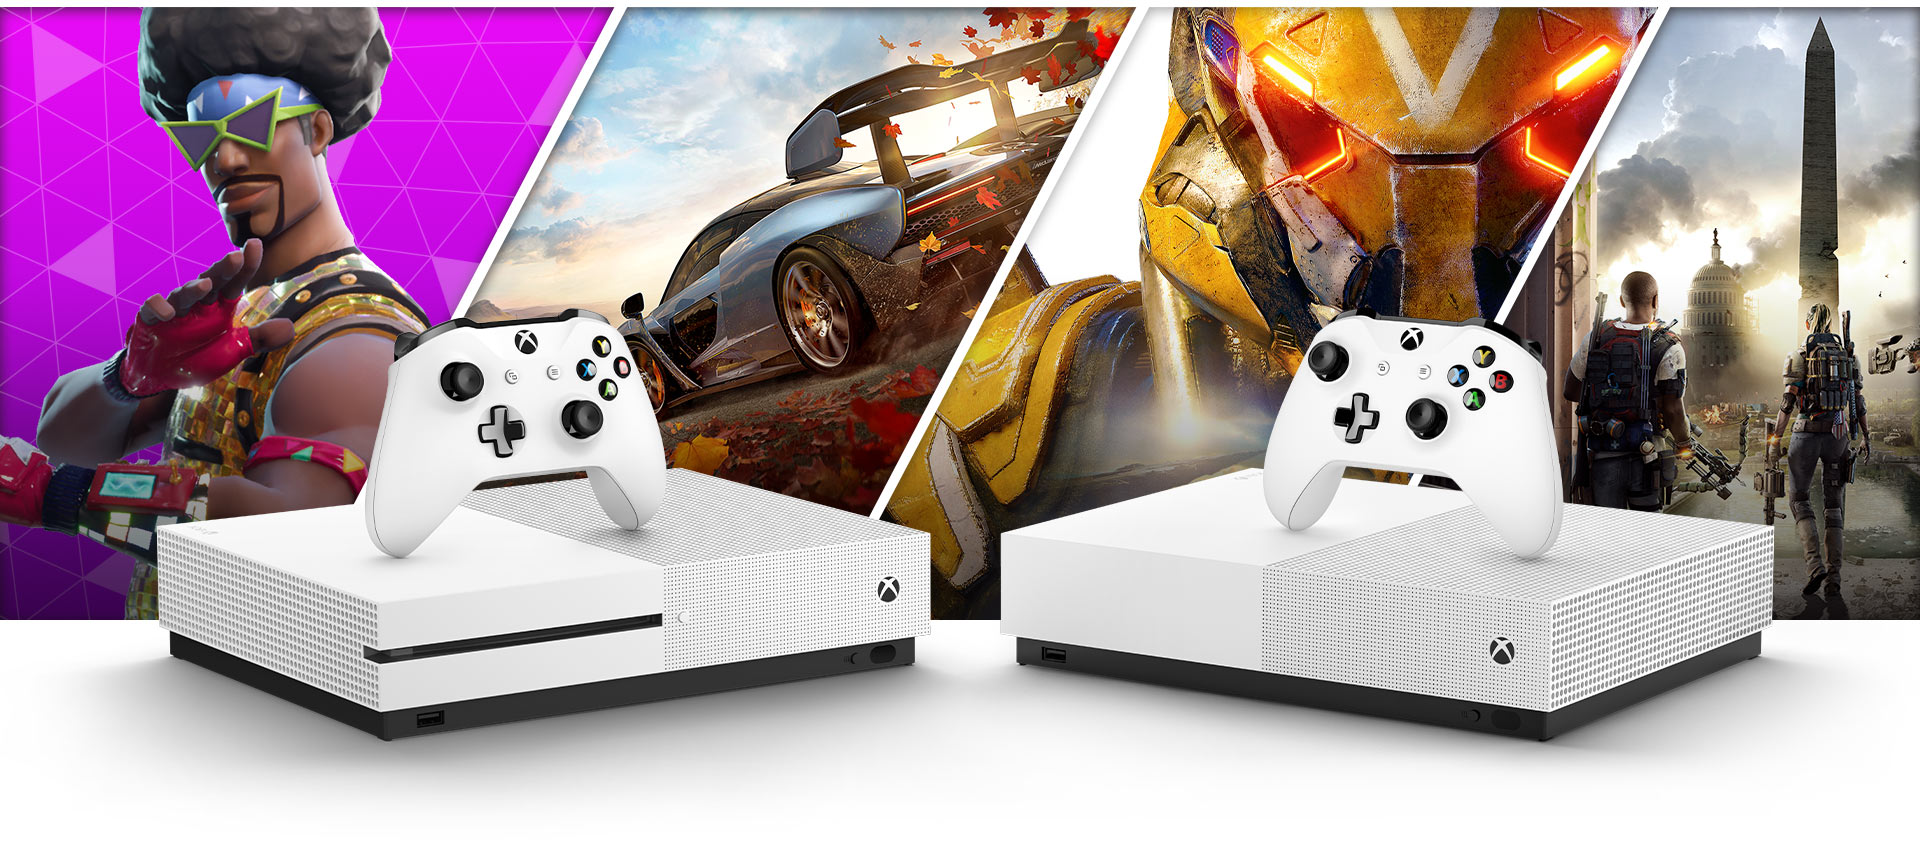 Fortnite, Forza Horizon 4, Fallout 76 and Shadow of the Tomb Raider graphics behind an Xbox One S and Xbox One S All Digital Edition